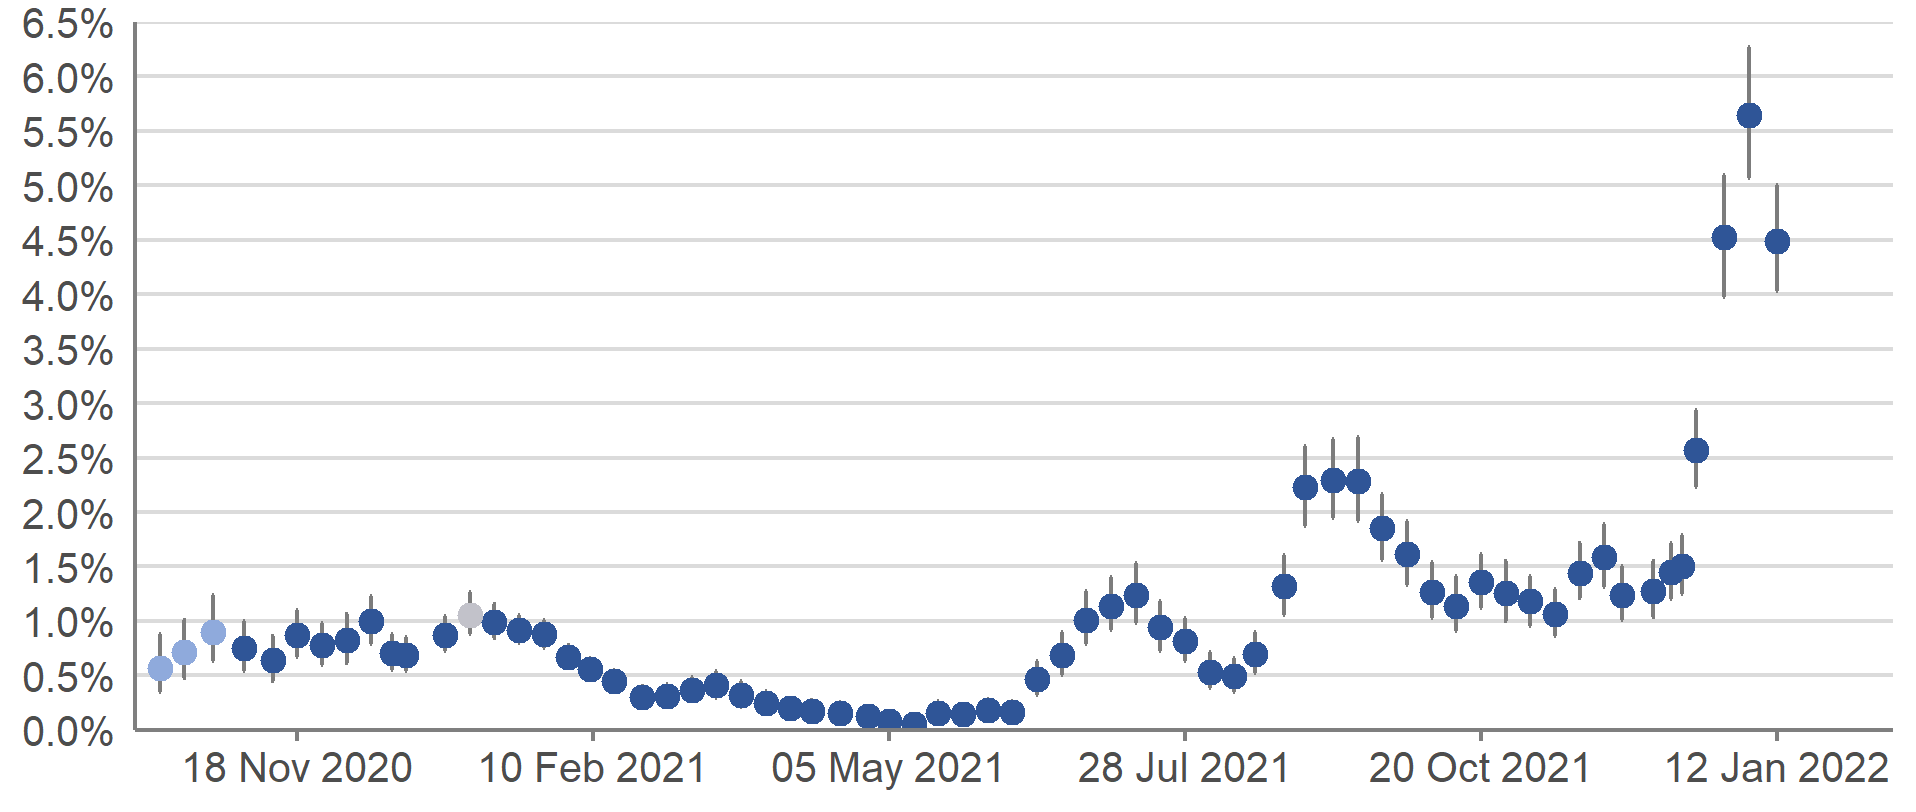 Estimates for the percentage of people testing positive for COVID-19 in Scotland increased between early-December and early-January, and reached their highest peak since the start of the pandemic in the week 1 to 7 January 2022. In the most recent week, the percentage of people testing positive has decreased.